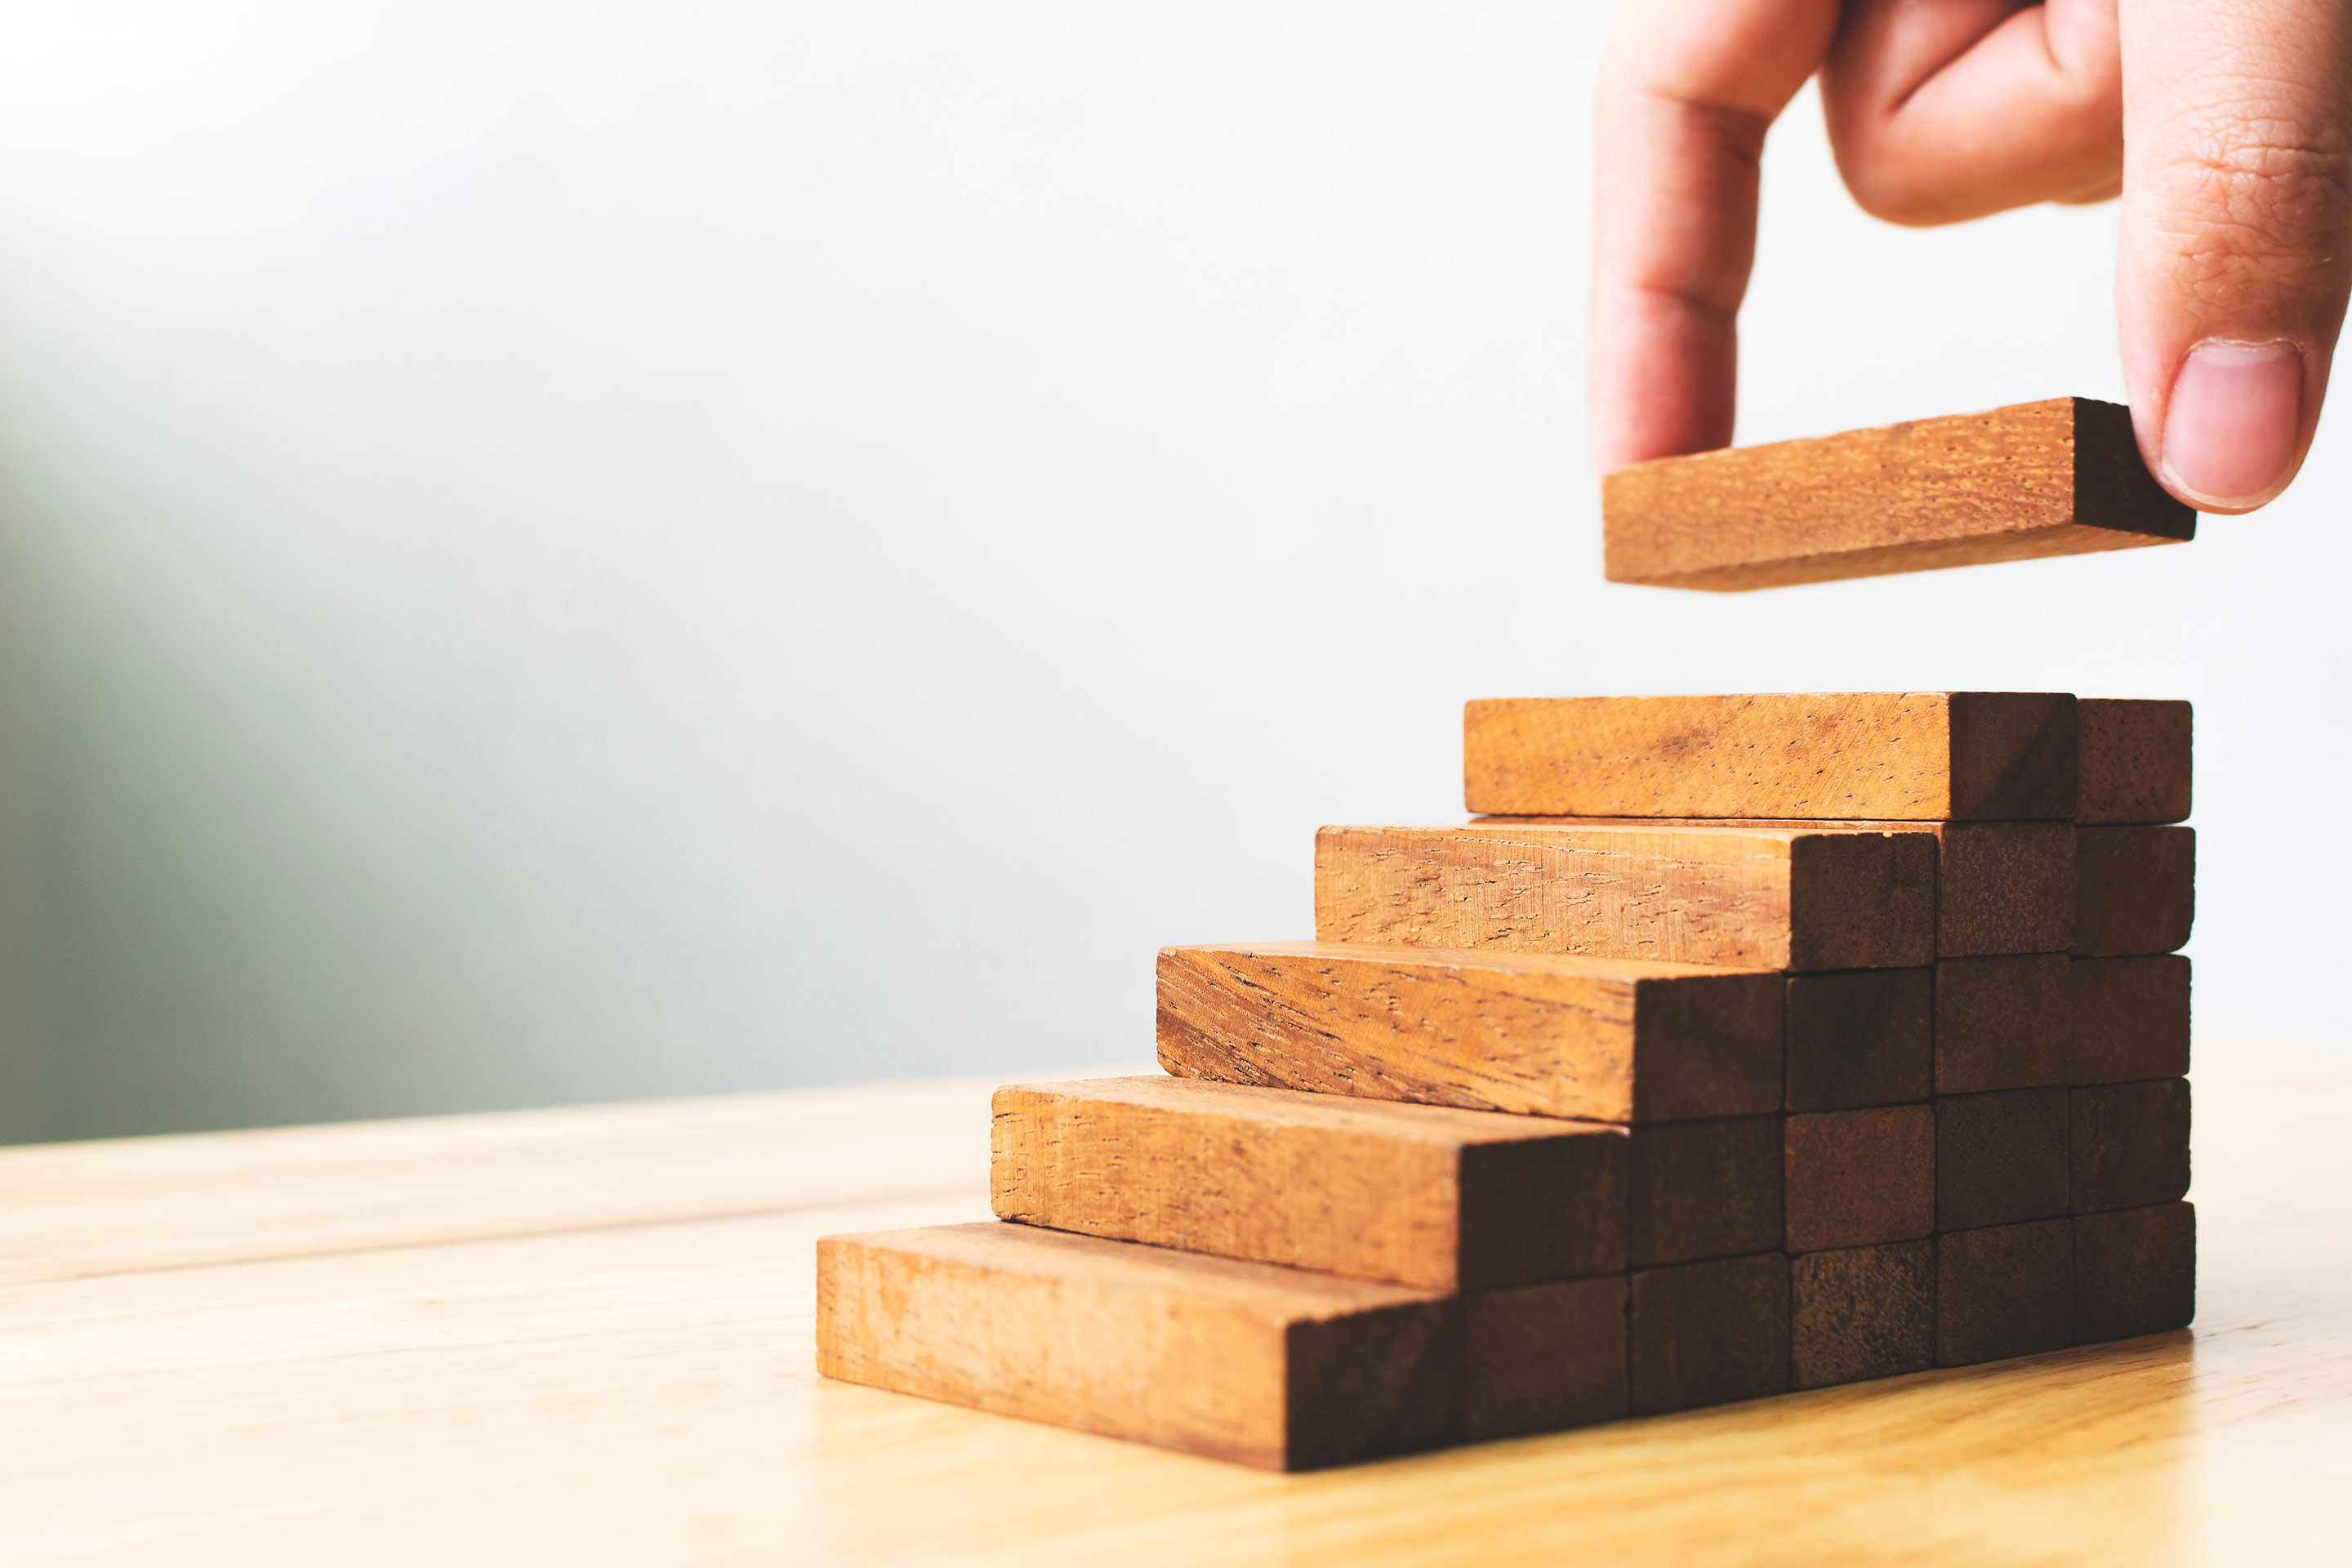 A hand adds a block to a wood puzzle in the shape of ascending stairs, as a metaphor for potential investment performance